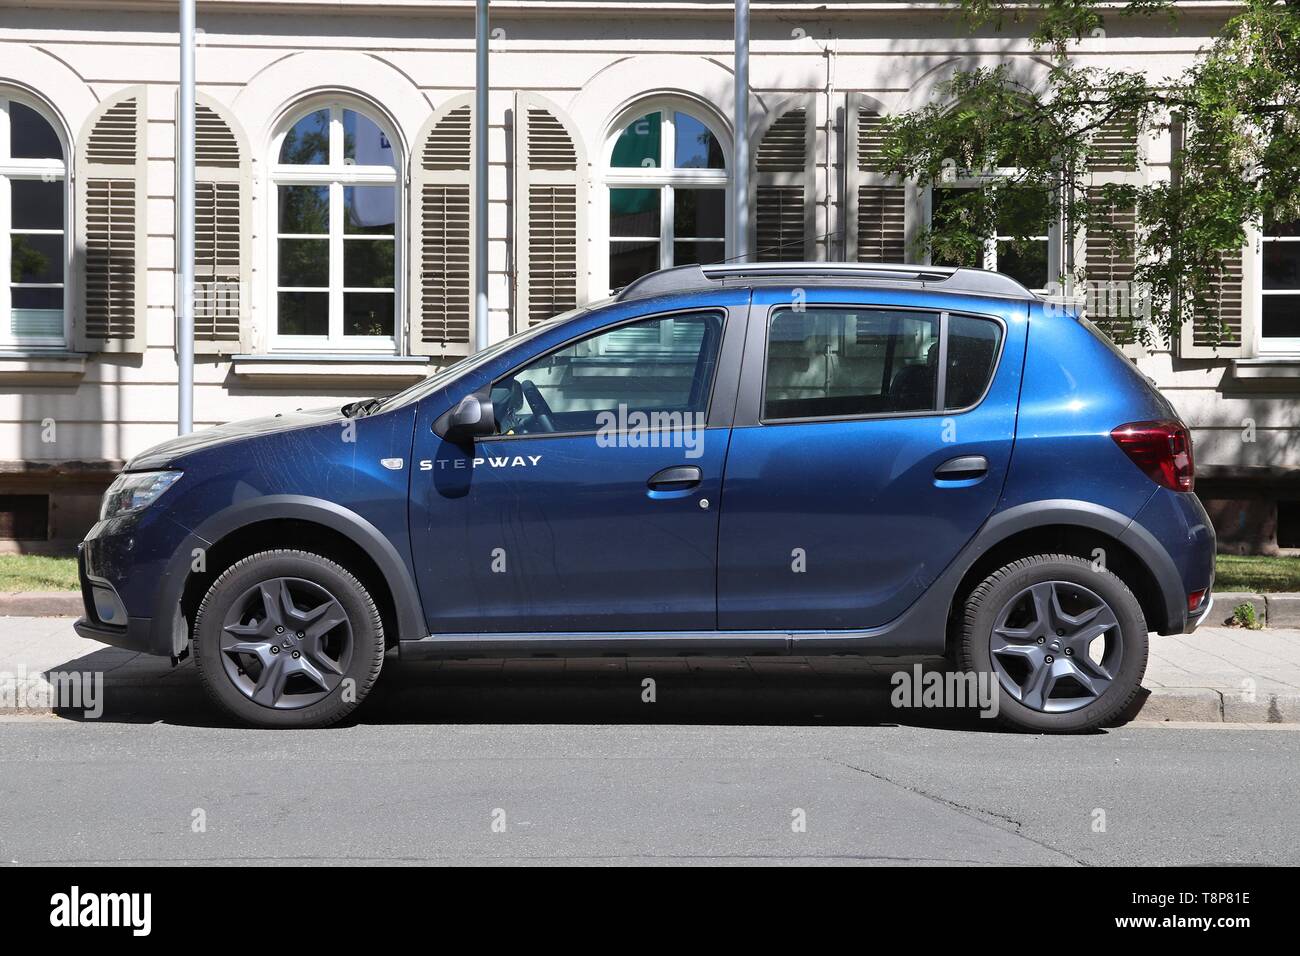 ERLANGEN, GERMANY - MAY 6, 2018: Dacia Sandero Stepway blue compact crossover car parked in Germany. There were 45.8 million cars registered in German Stock Photo